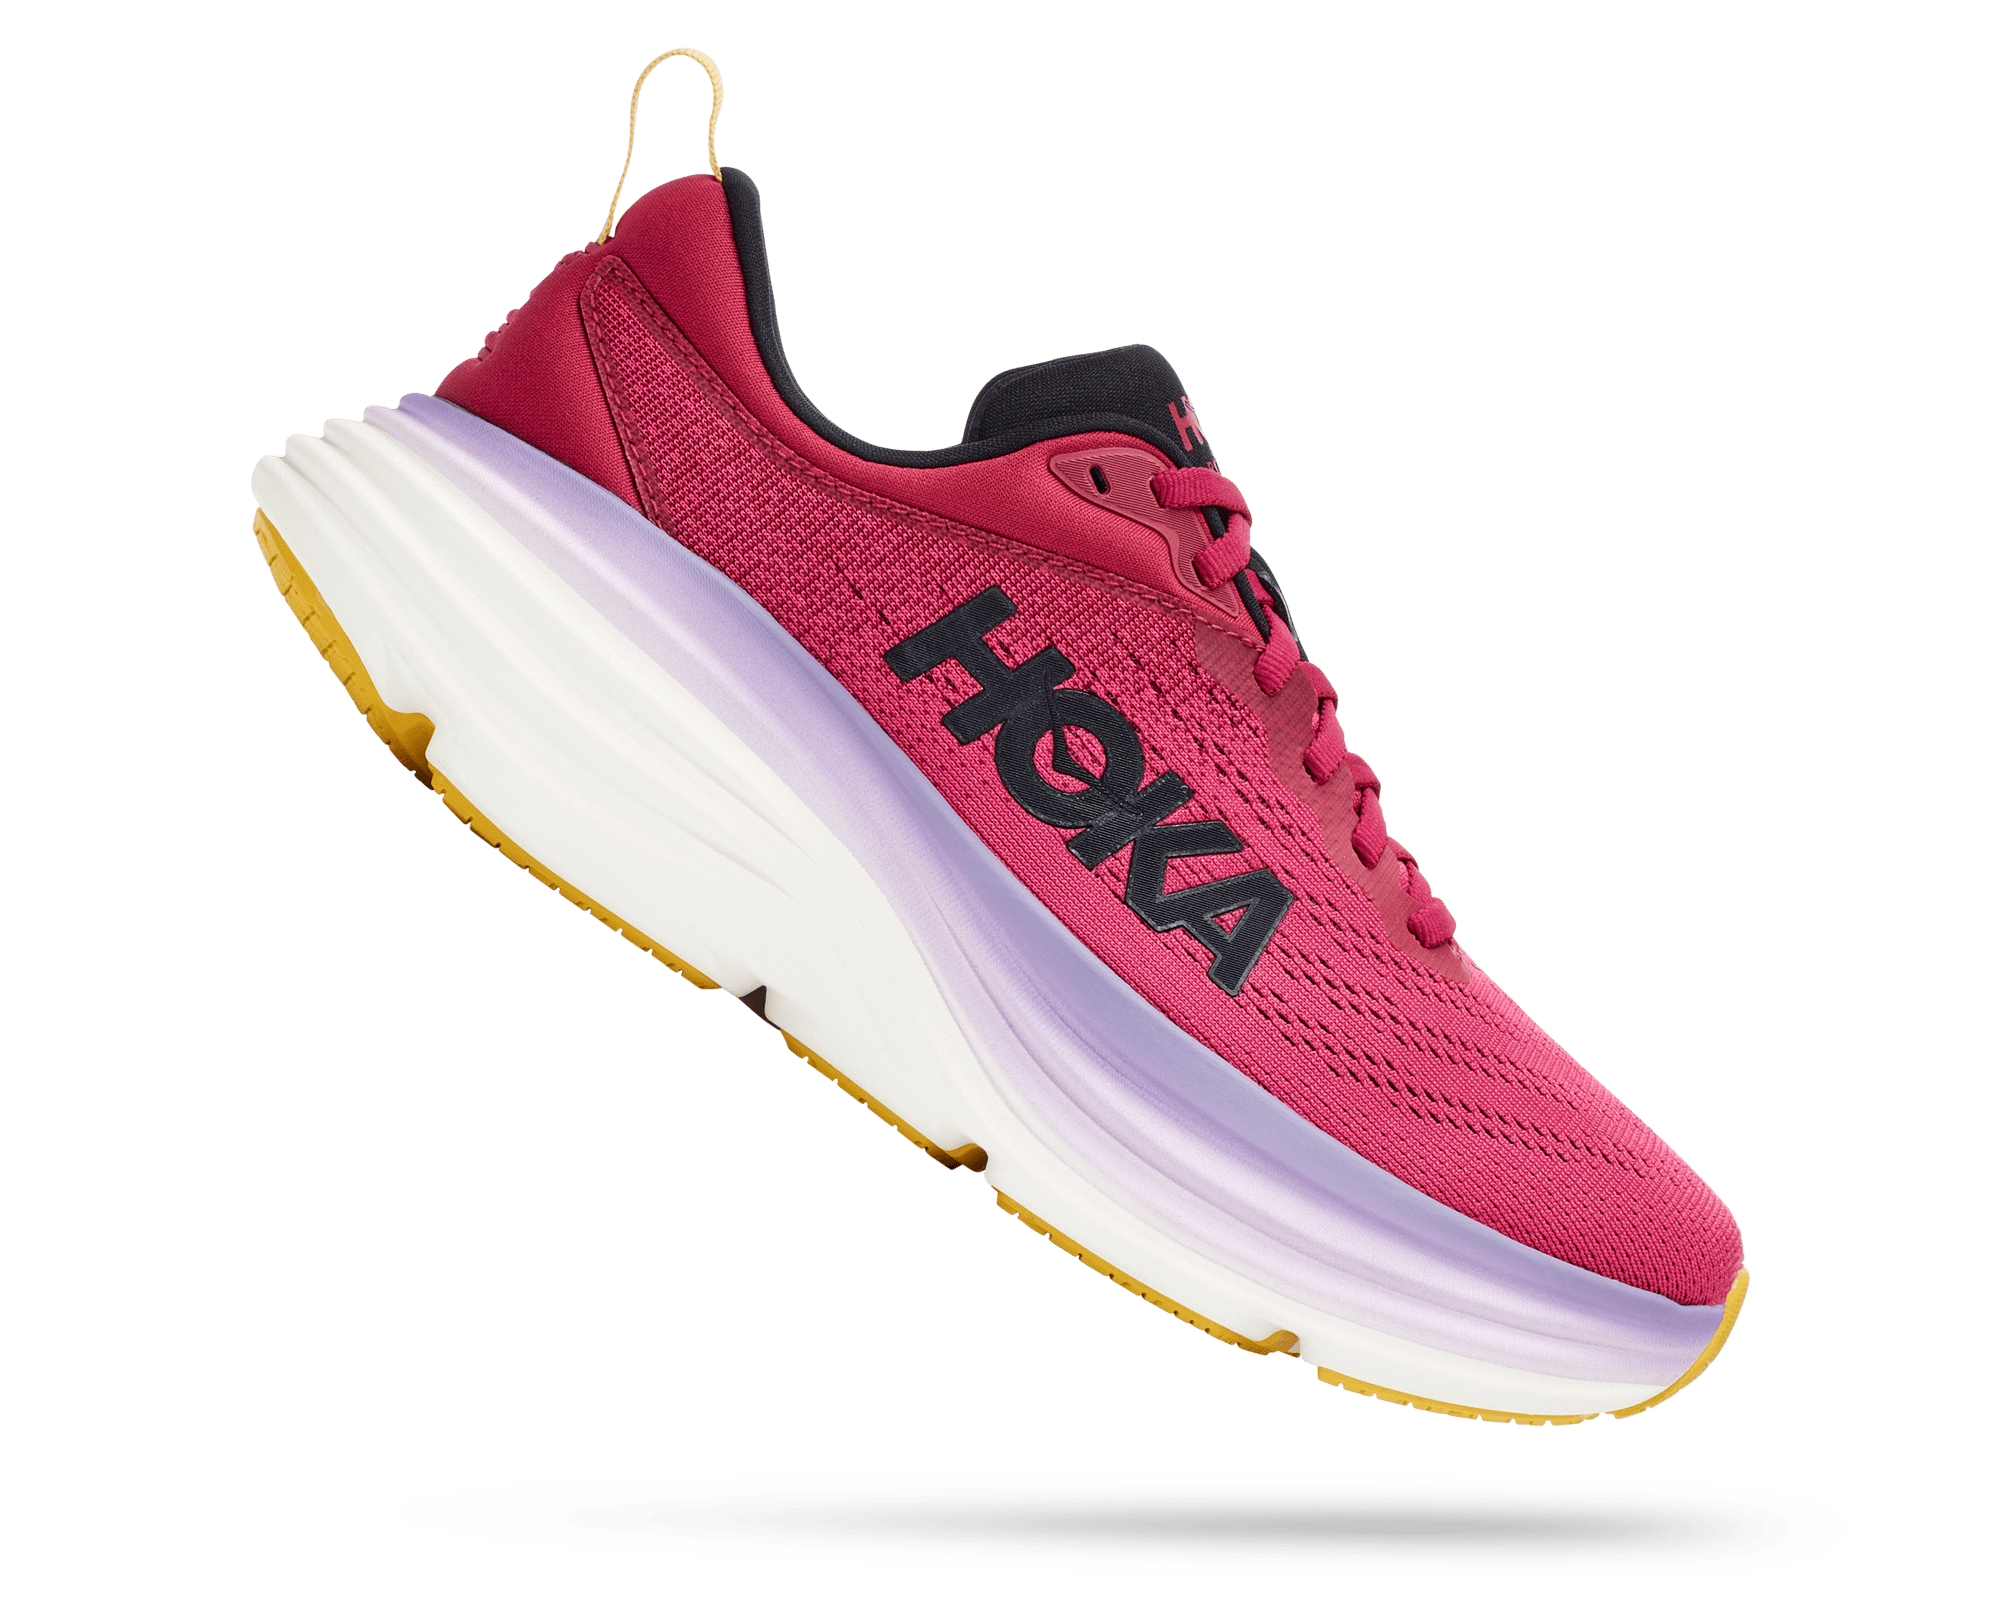 Angled lateral Lateral view of the Women's Bondi 8 by HOKA in the color Cherries Jubilee/Pink Yarrow